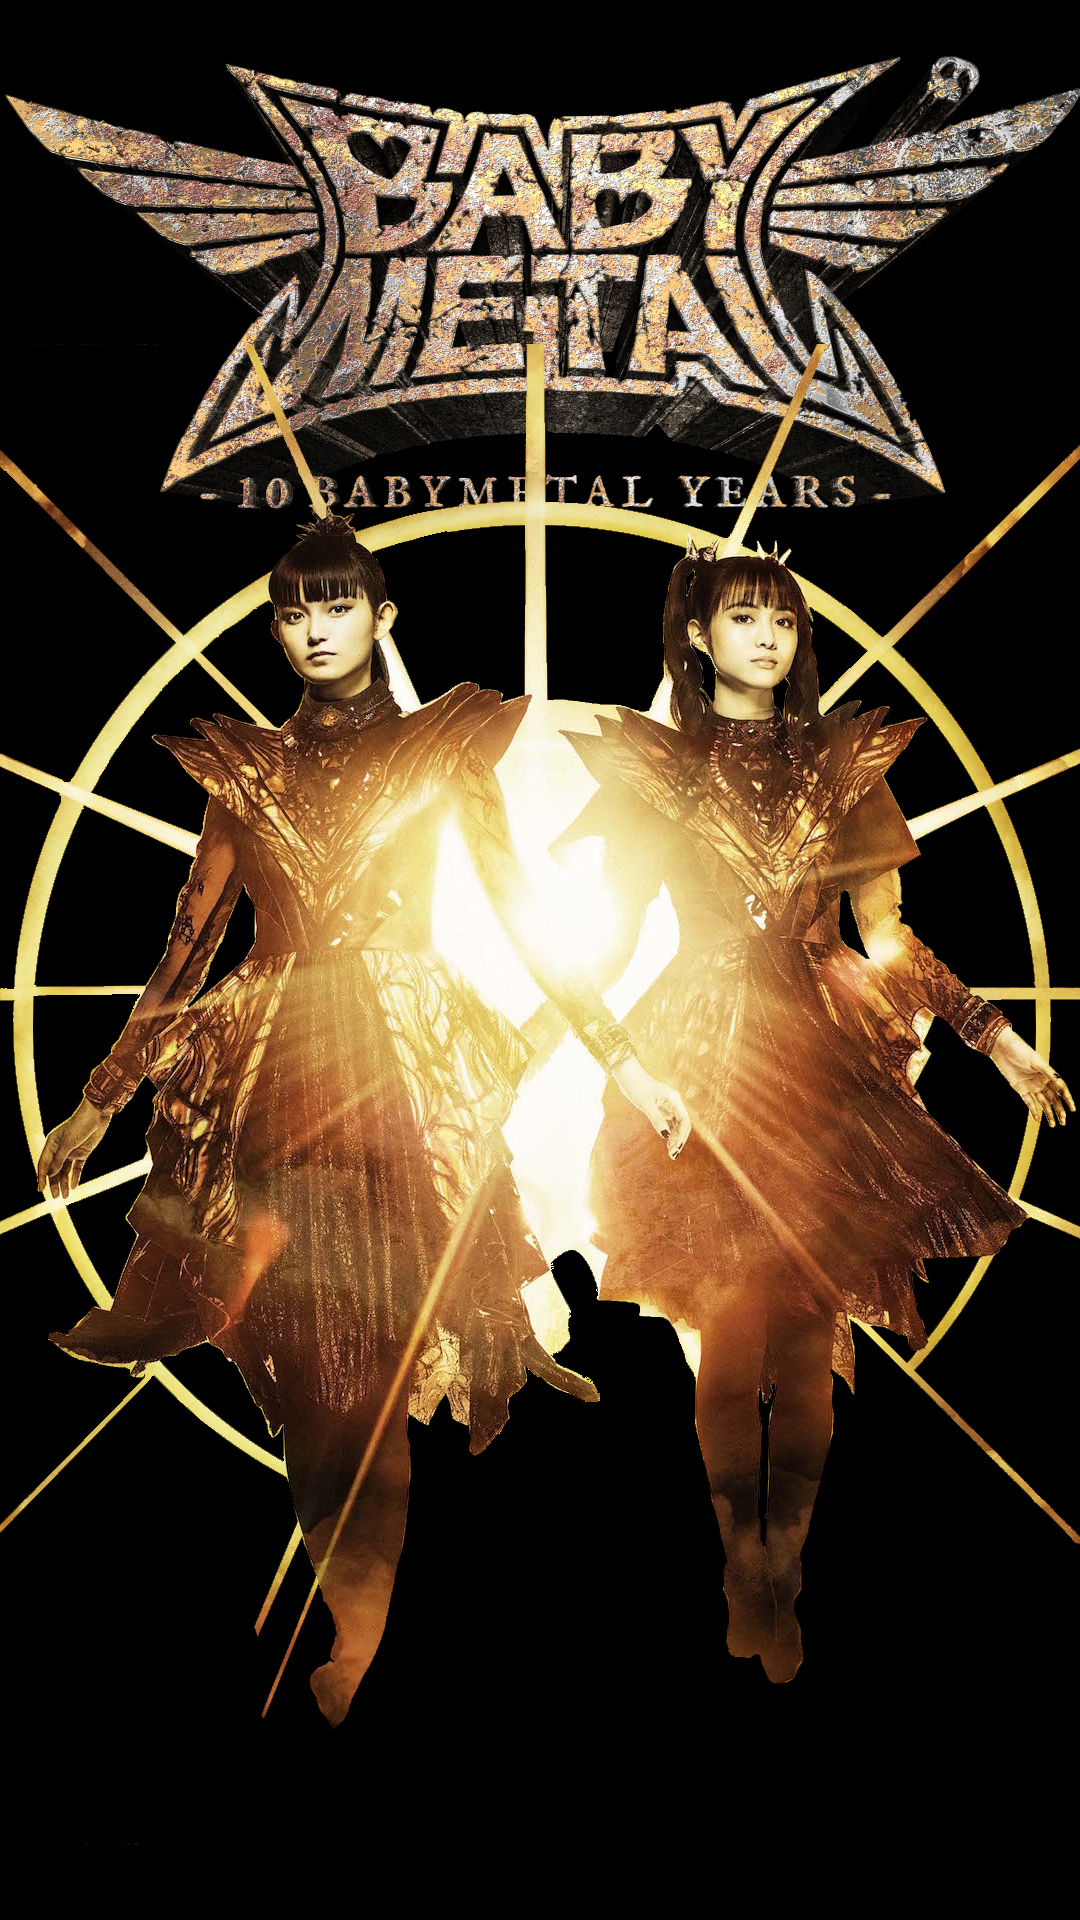 10 Babymetal Years Android Wallpaper By Lonewolfsg On Deviantart